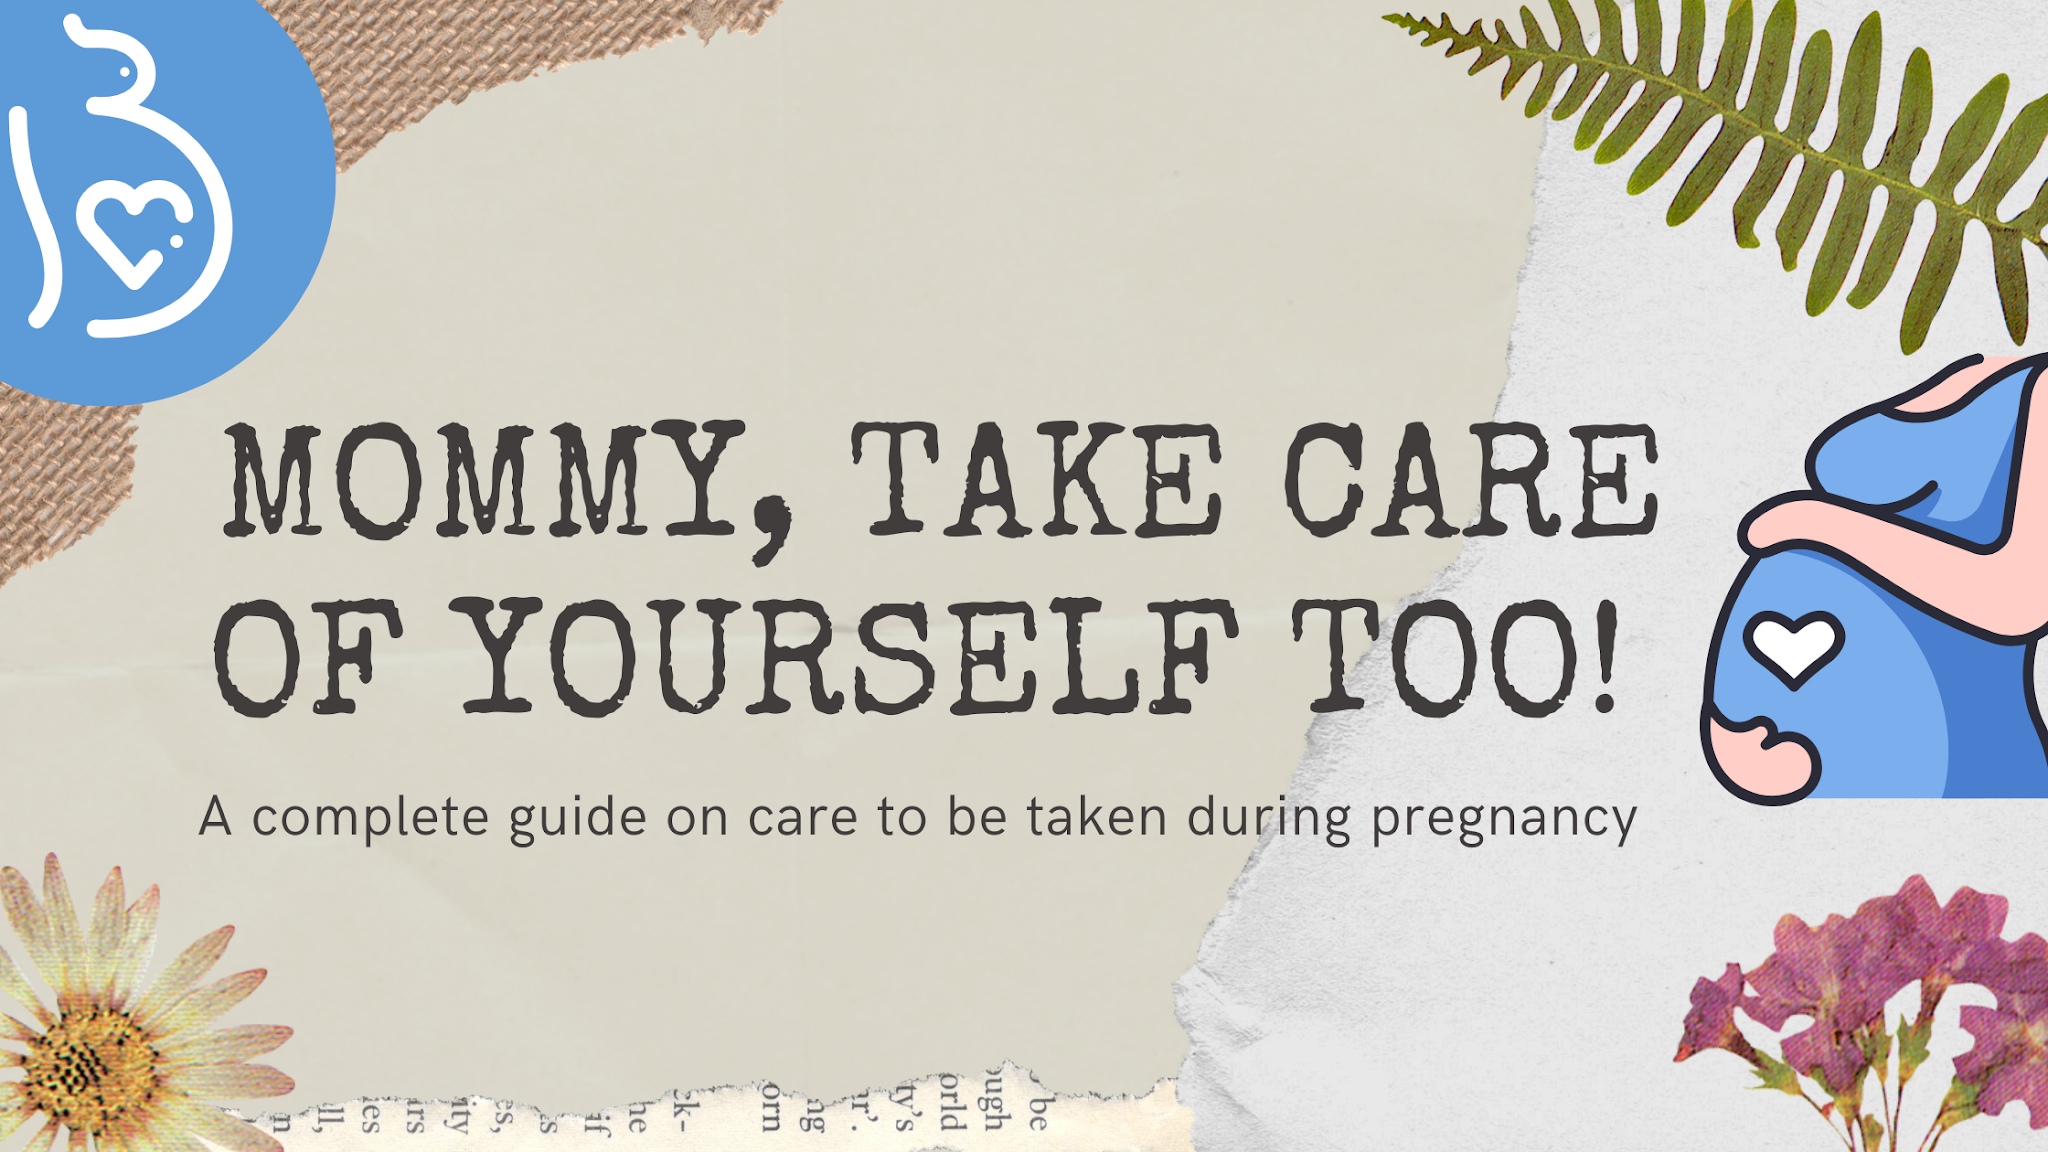 Mommy, Take care of yourself too! Care to be taken during pregnancy.